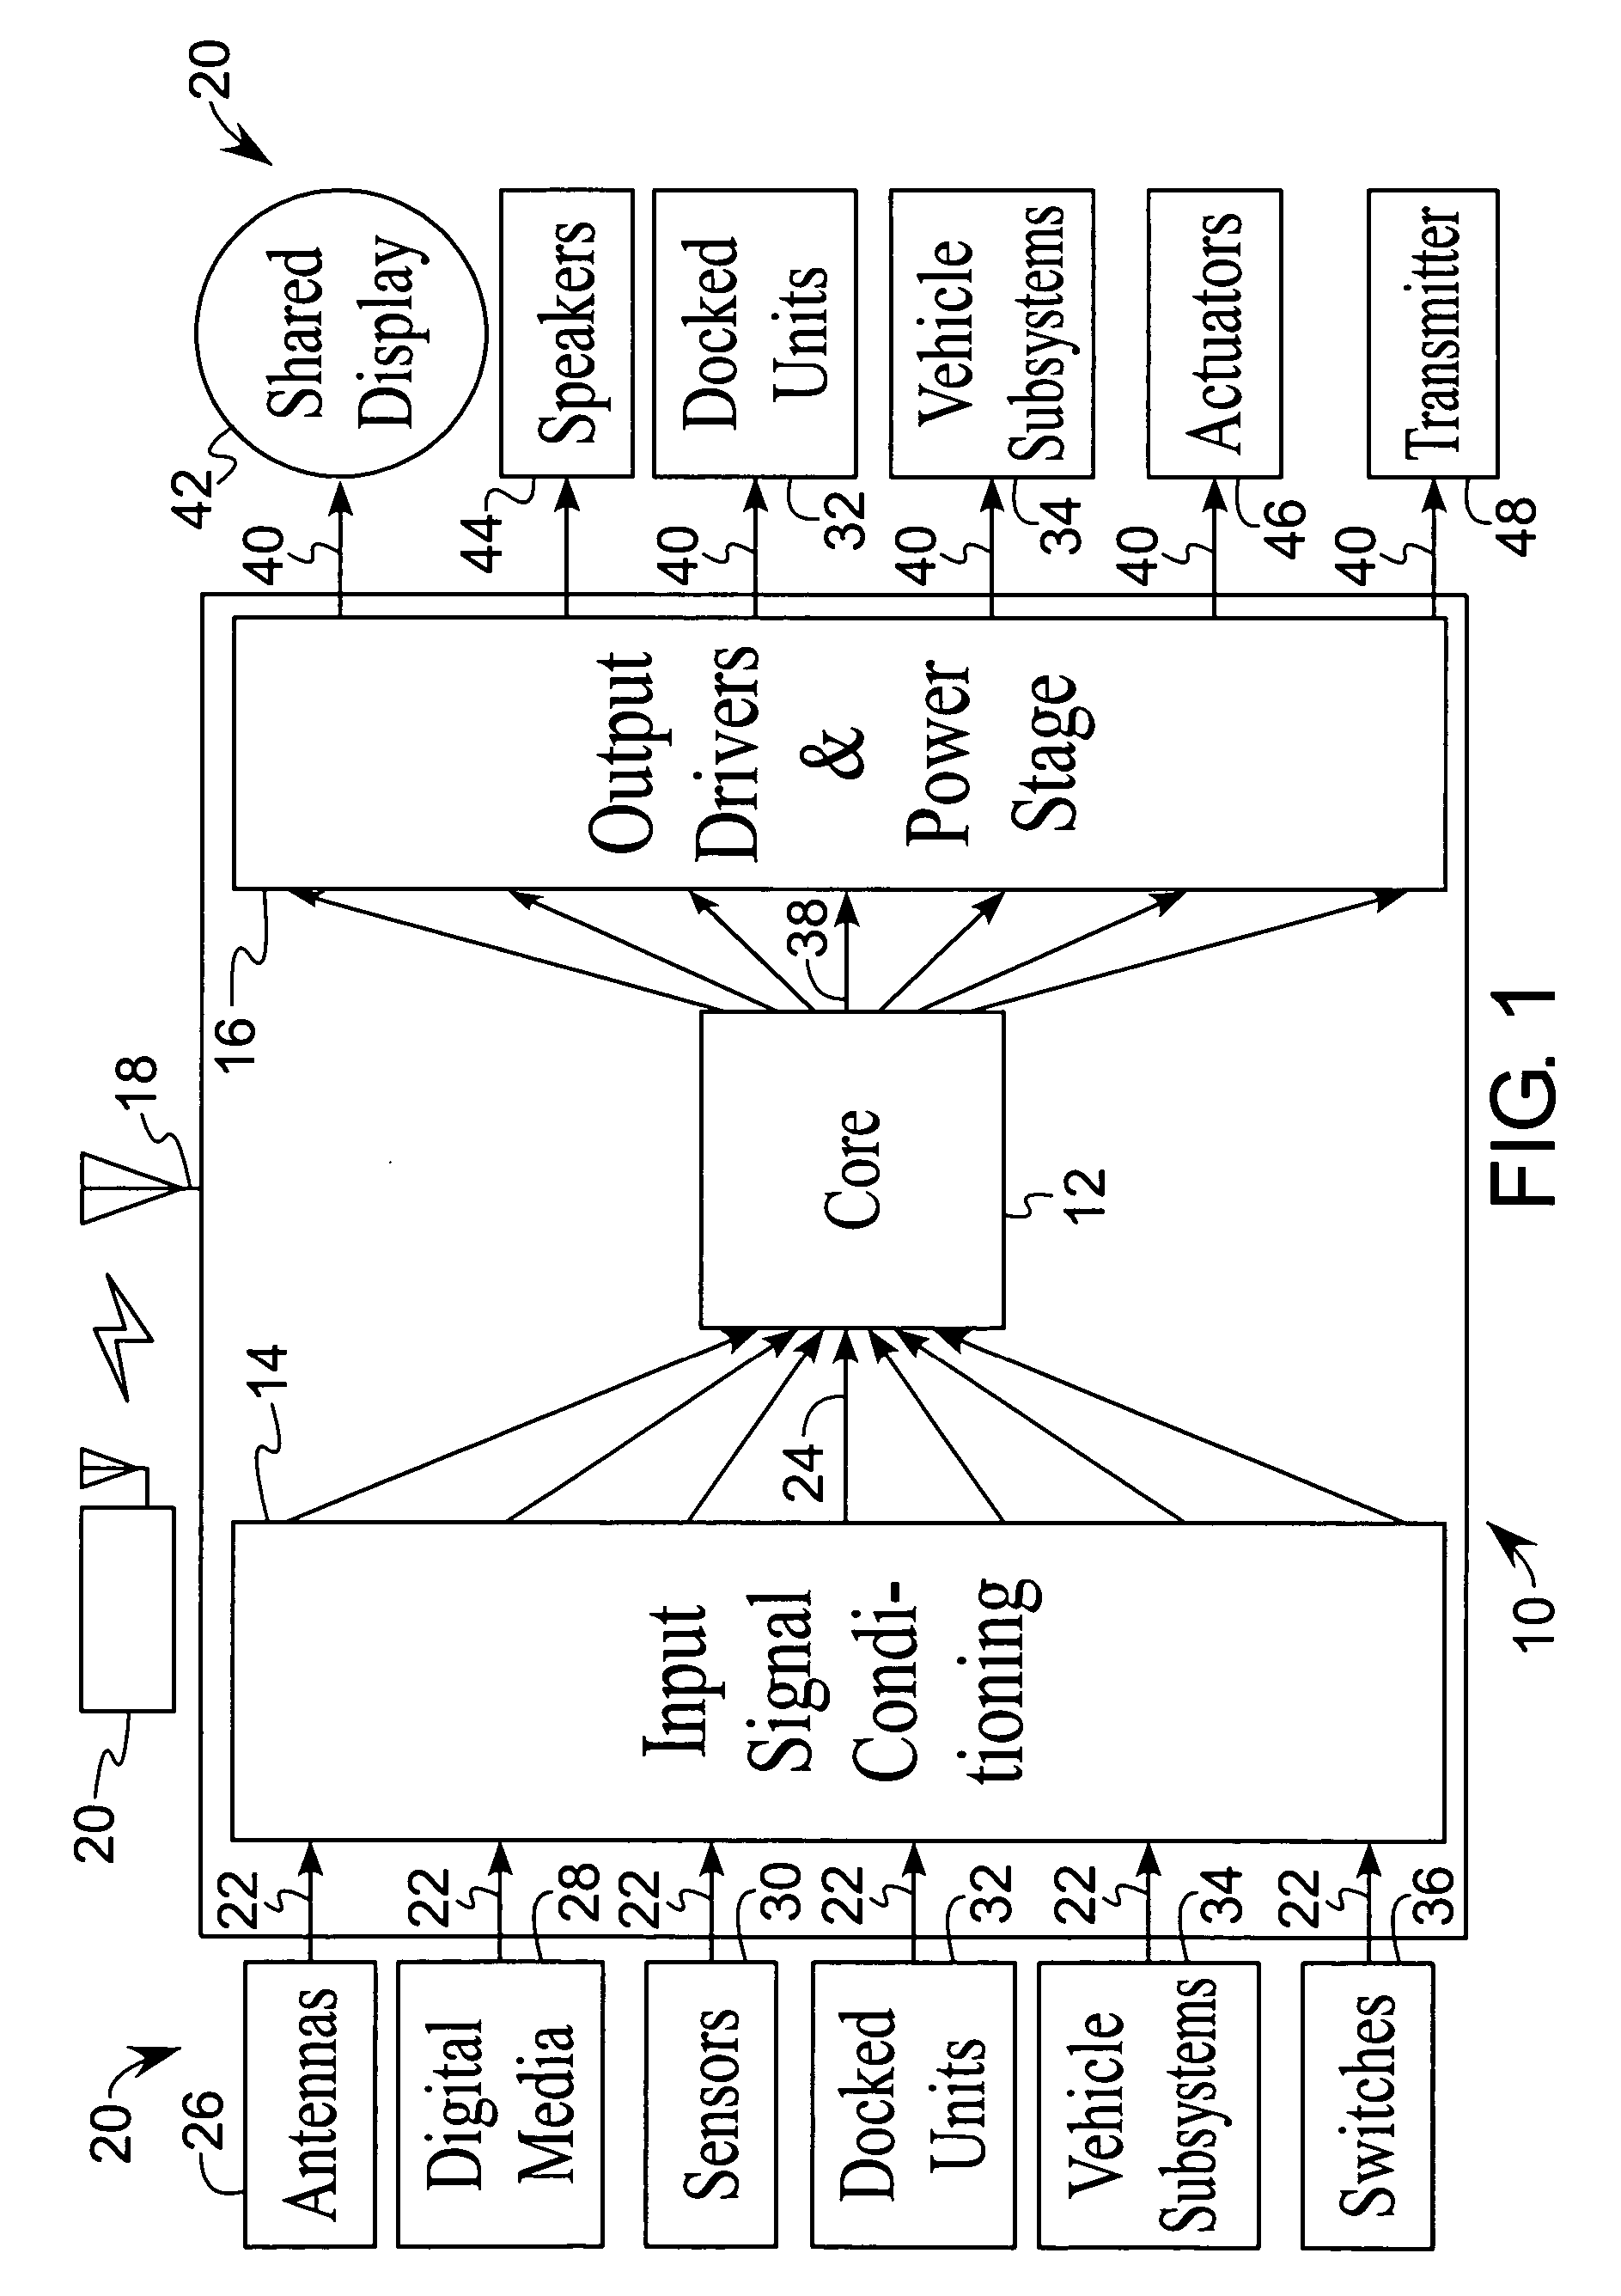 Control and interconnection system